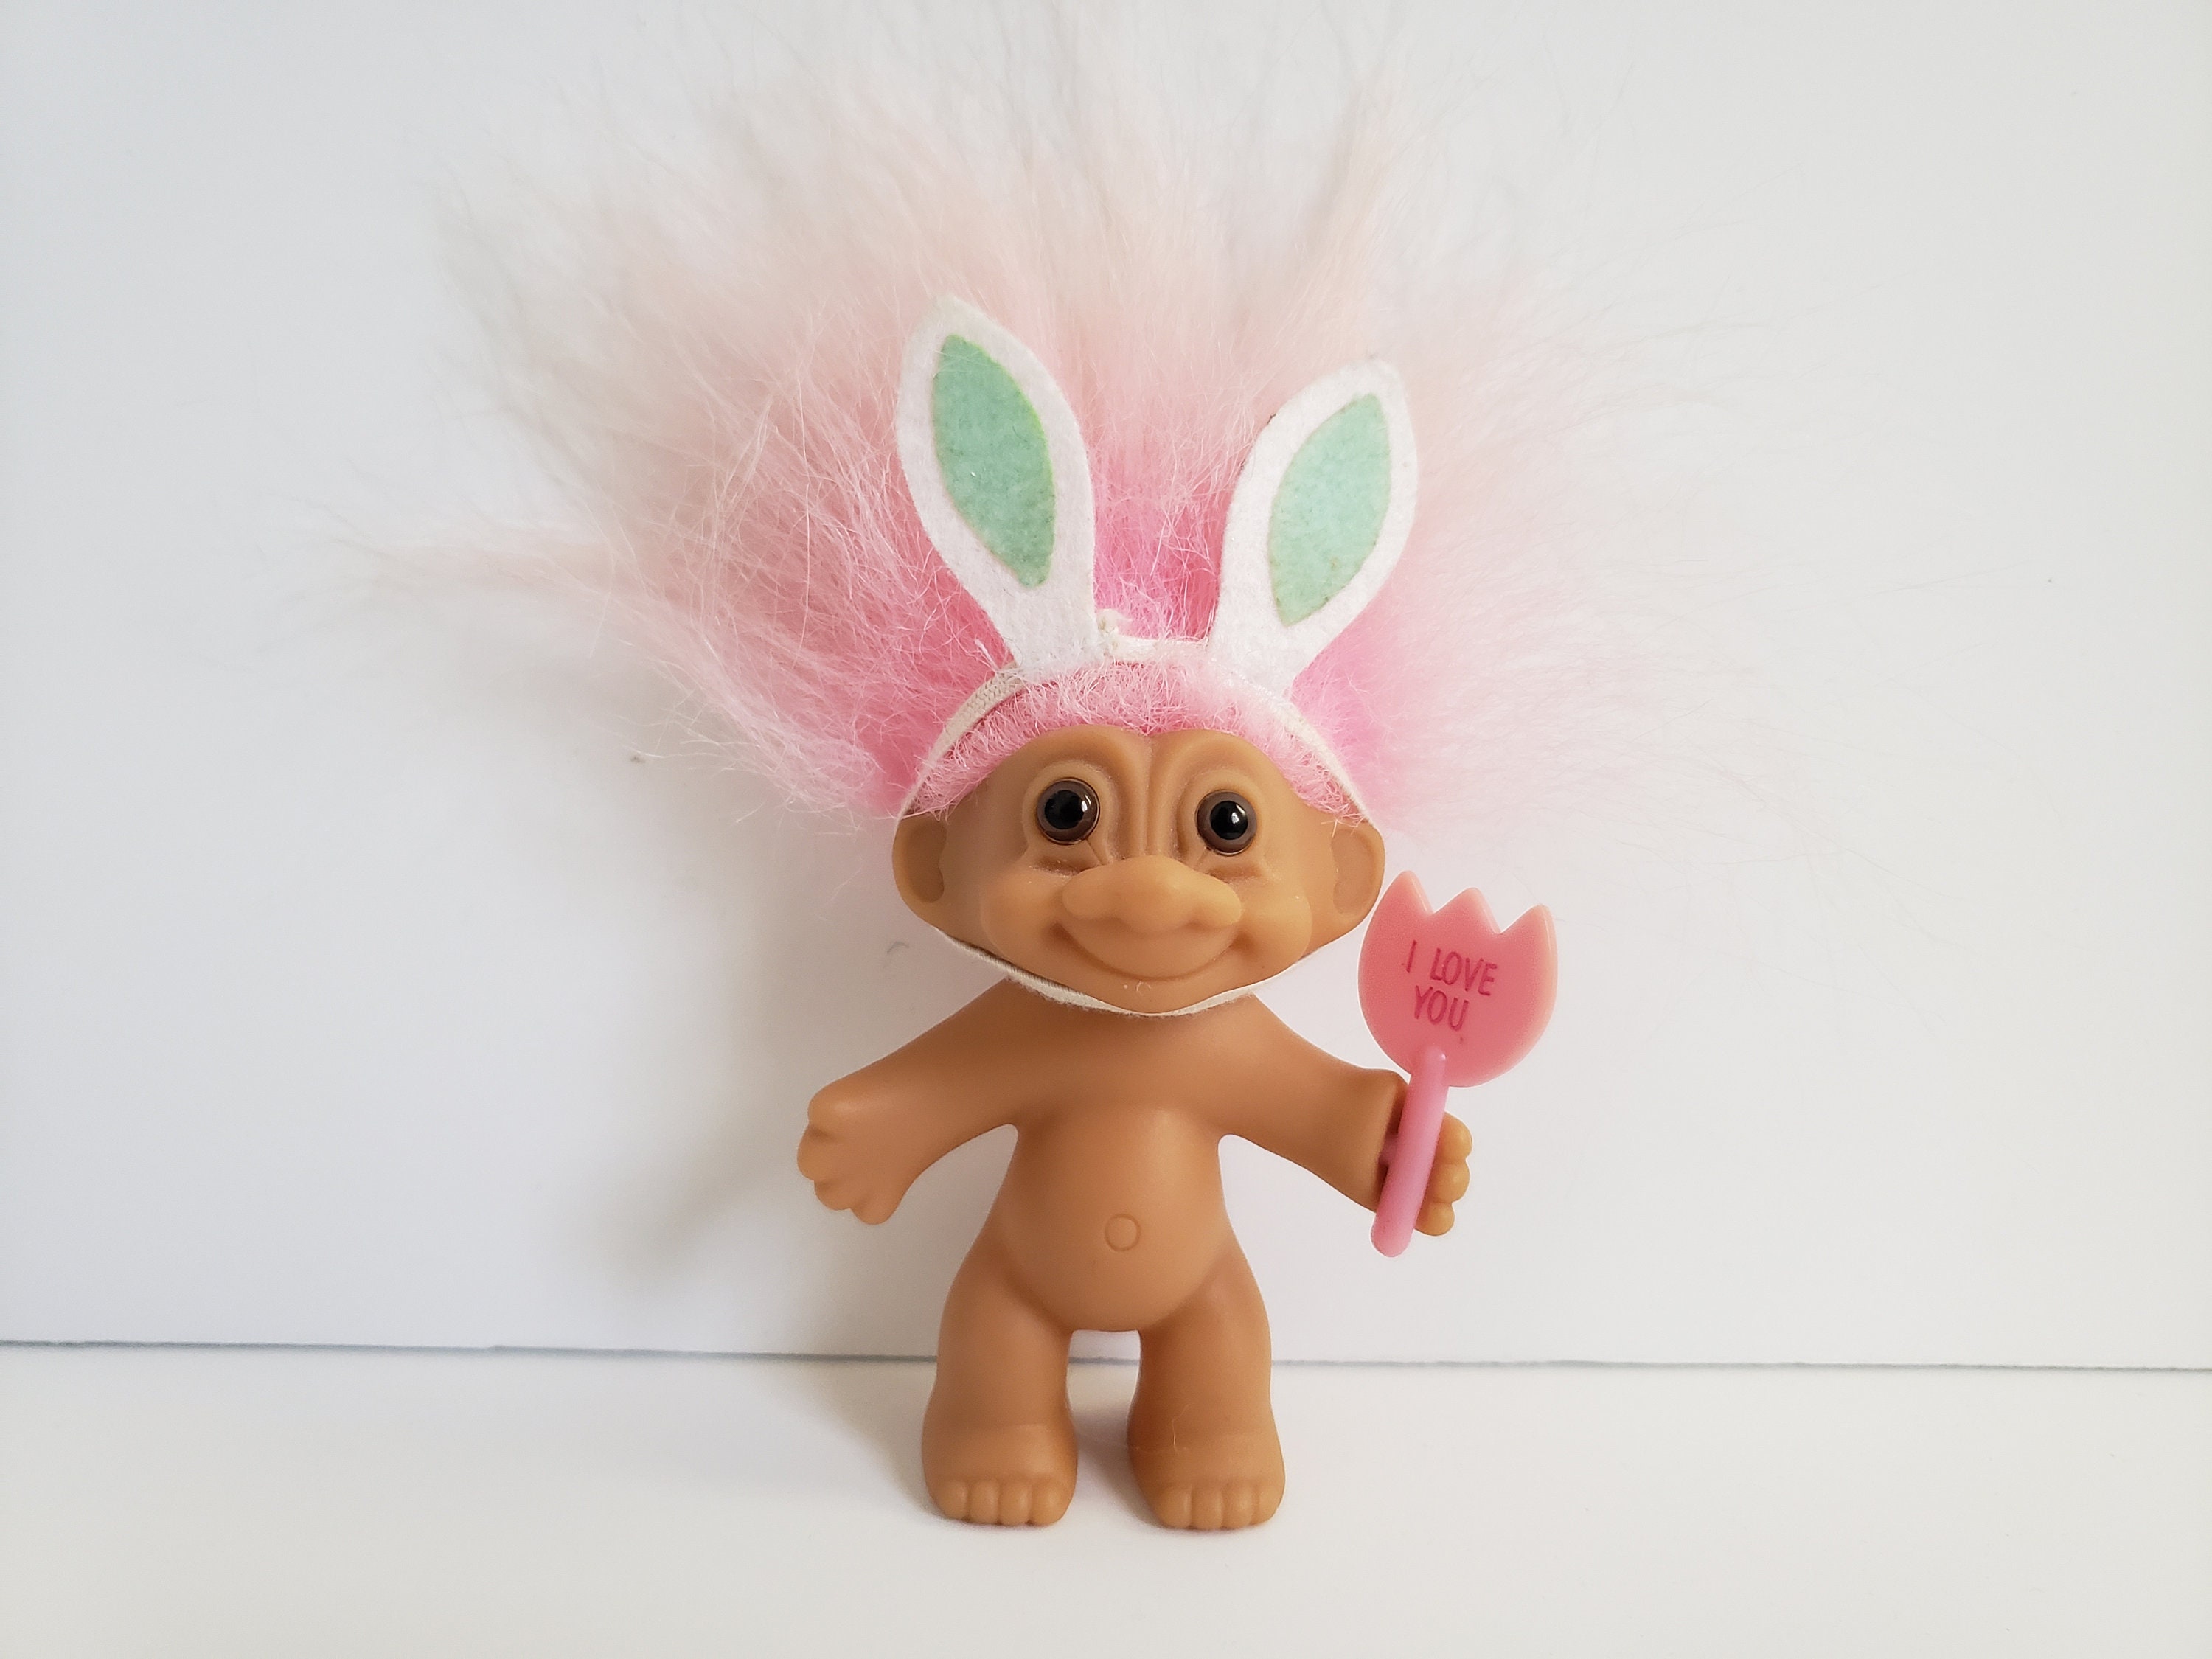 Vintage Russ Troll Doll Baby With Easter Bunny Ears, Pink Hair